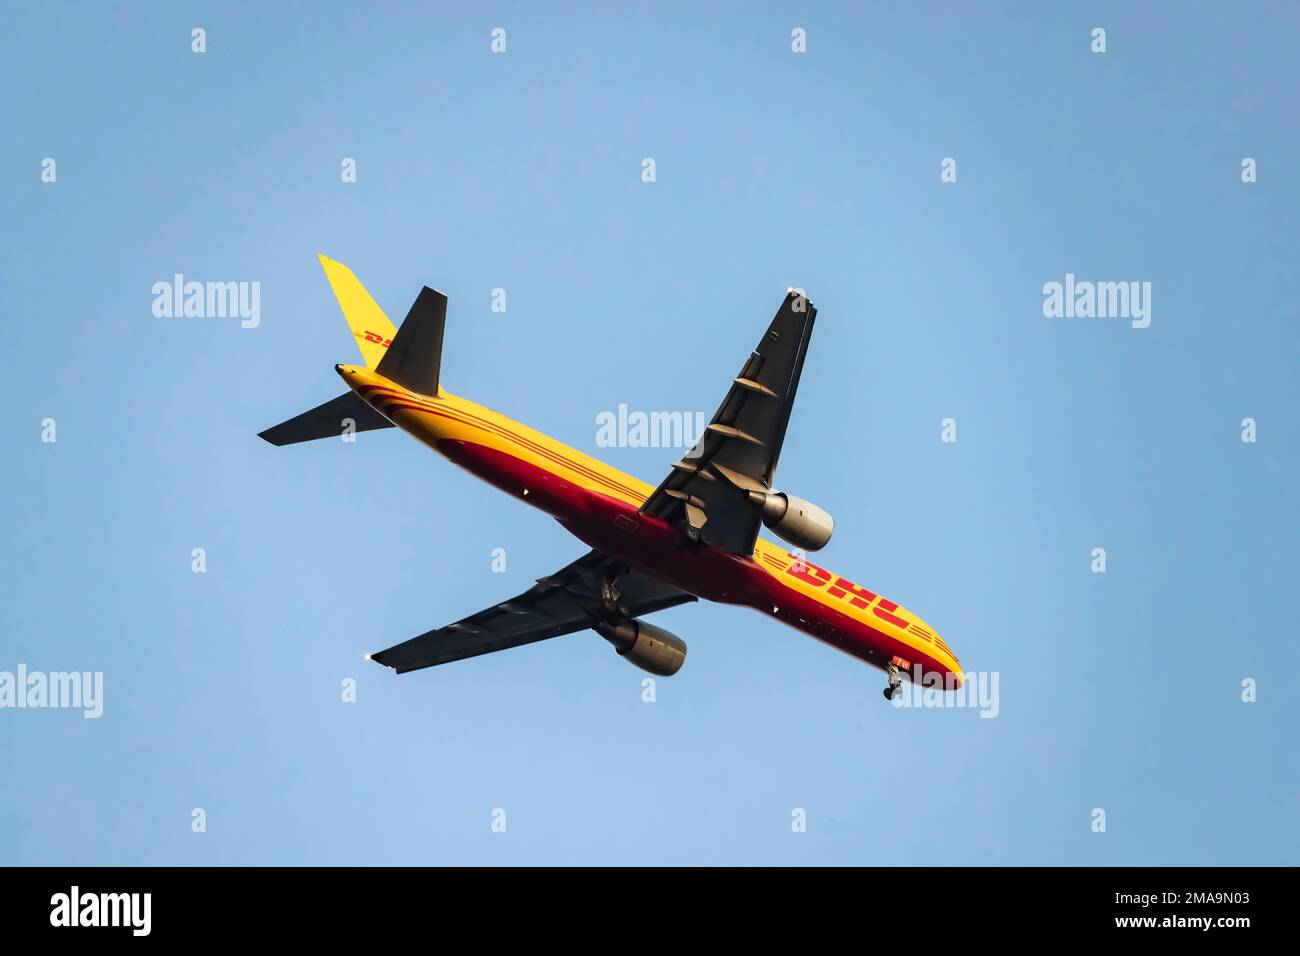 DHL Boeing 757-200F plane flying overhead approaching Lisbon, Portugal. Stock Photo